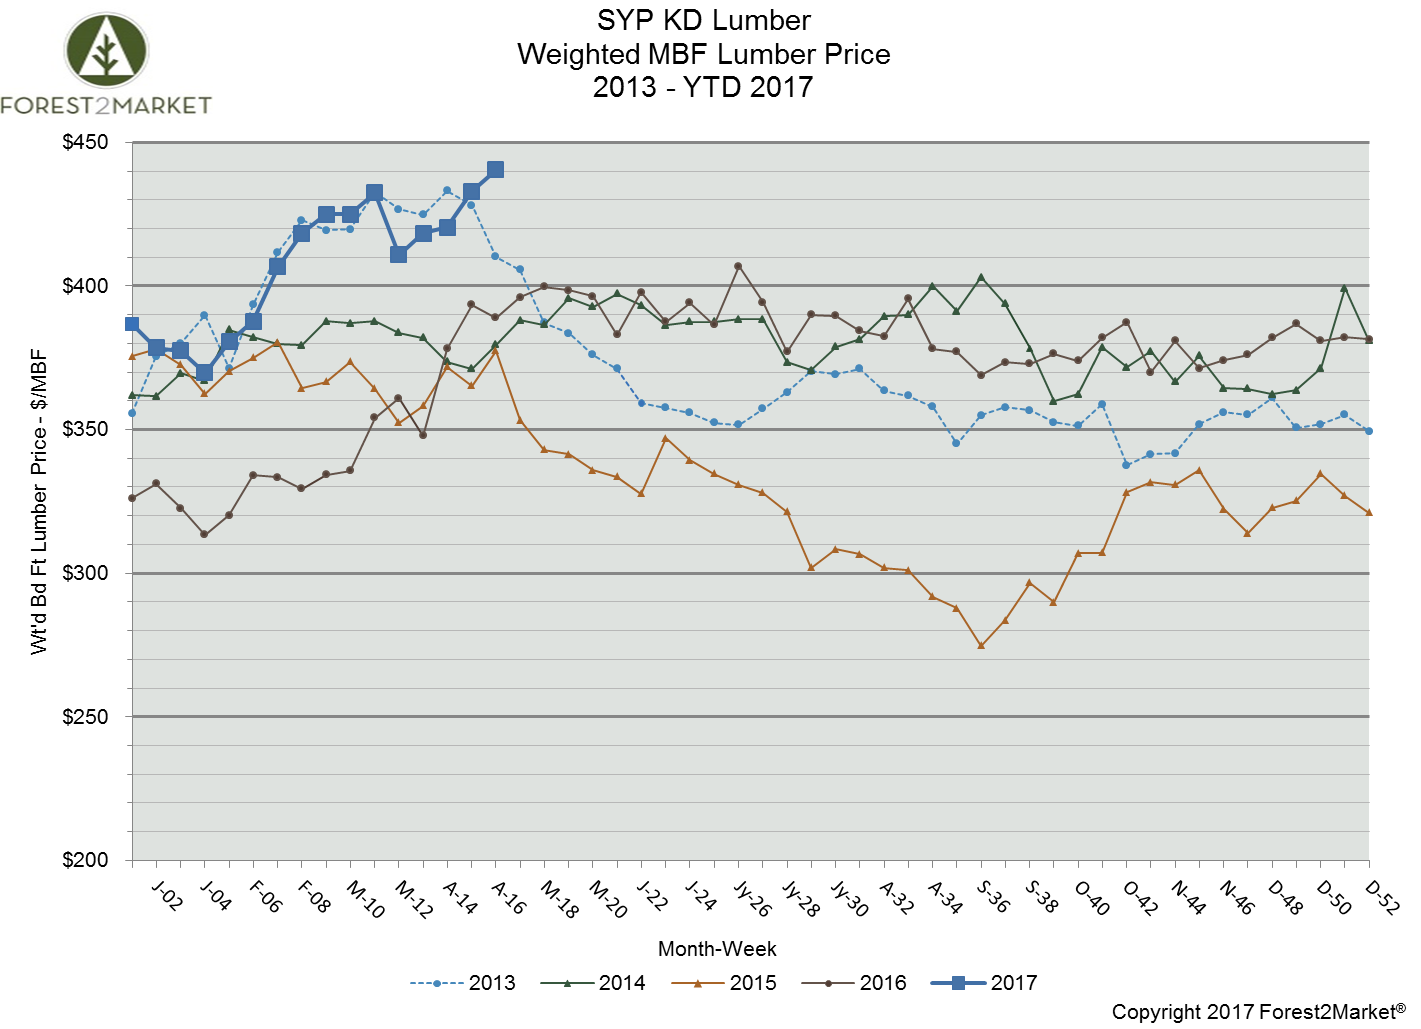 Southern Yellow Pine Lumber Prices Surge to 12-Year High in April